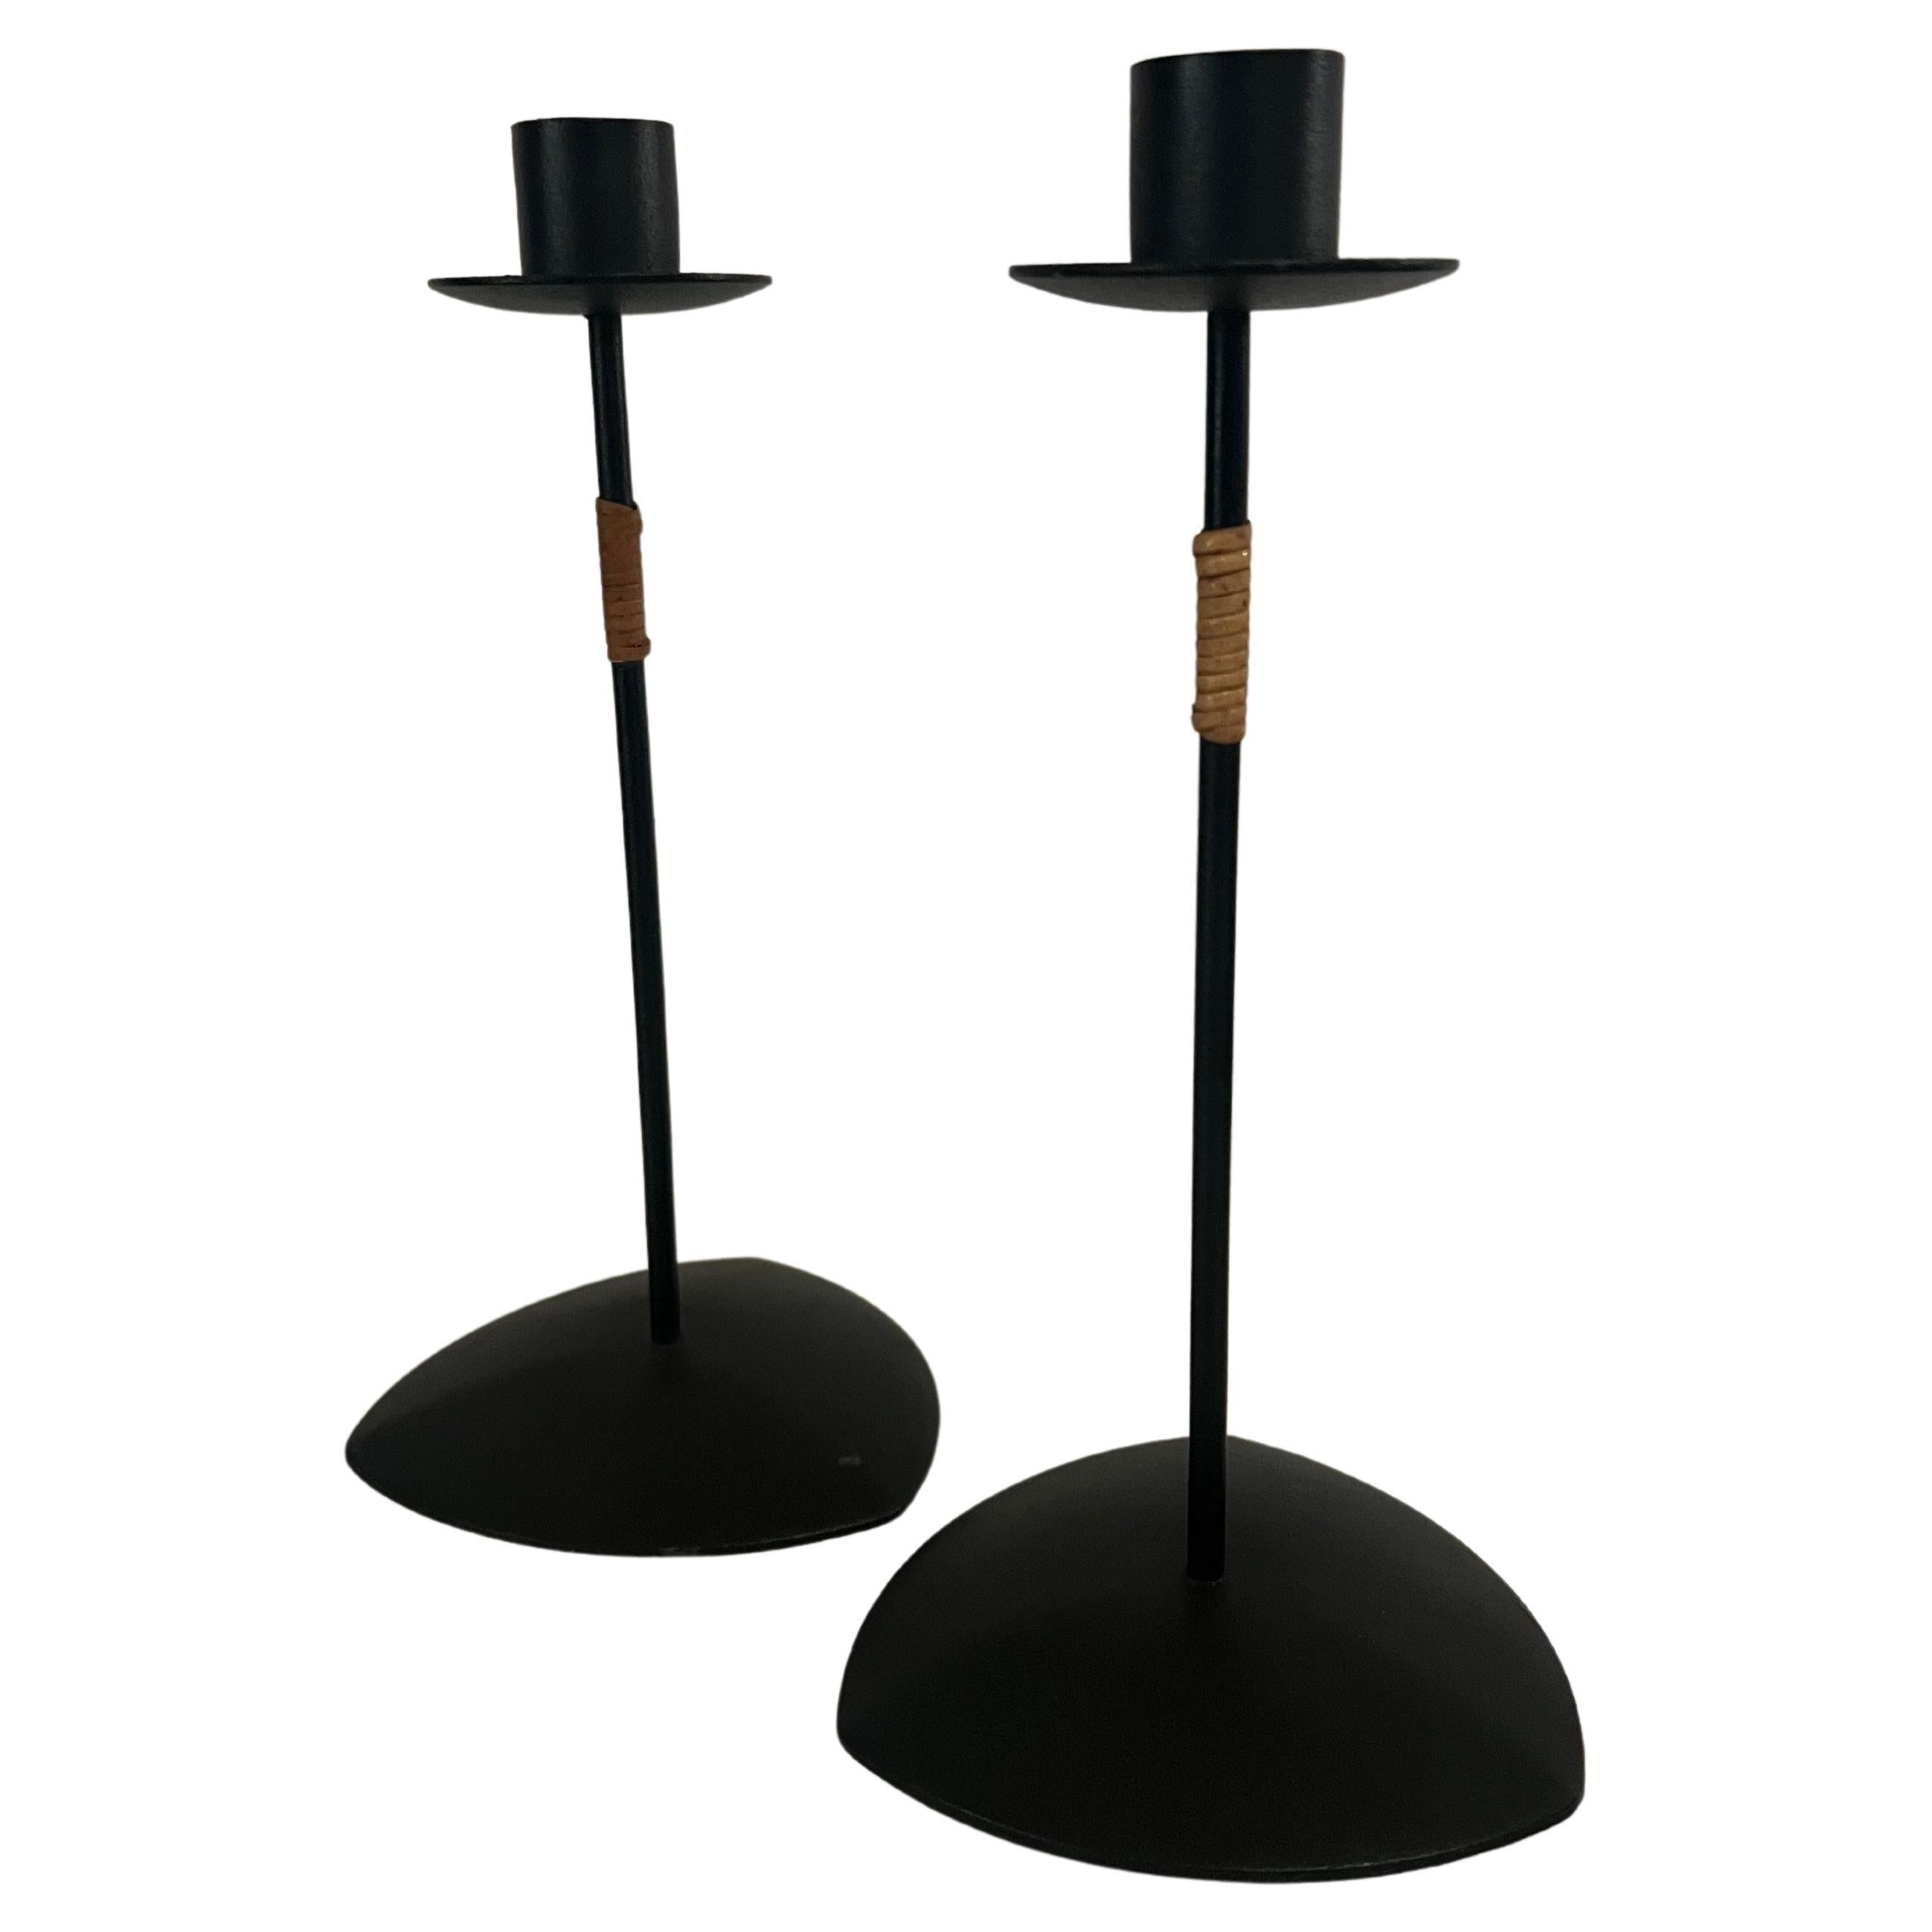 Danish modern Pair of Laurids Lonborg Candle Holders Metal & Cane